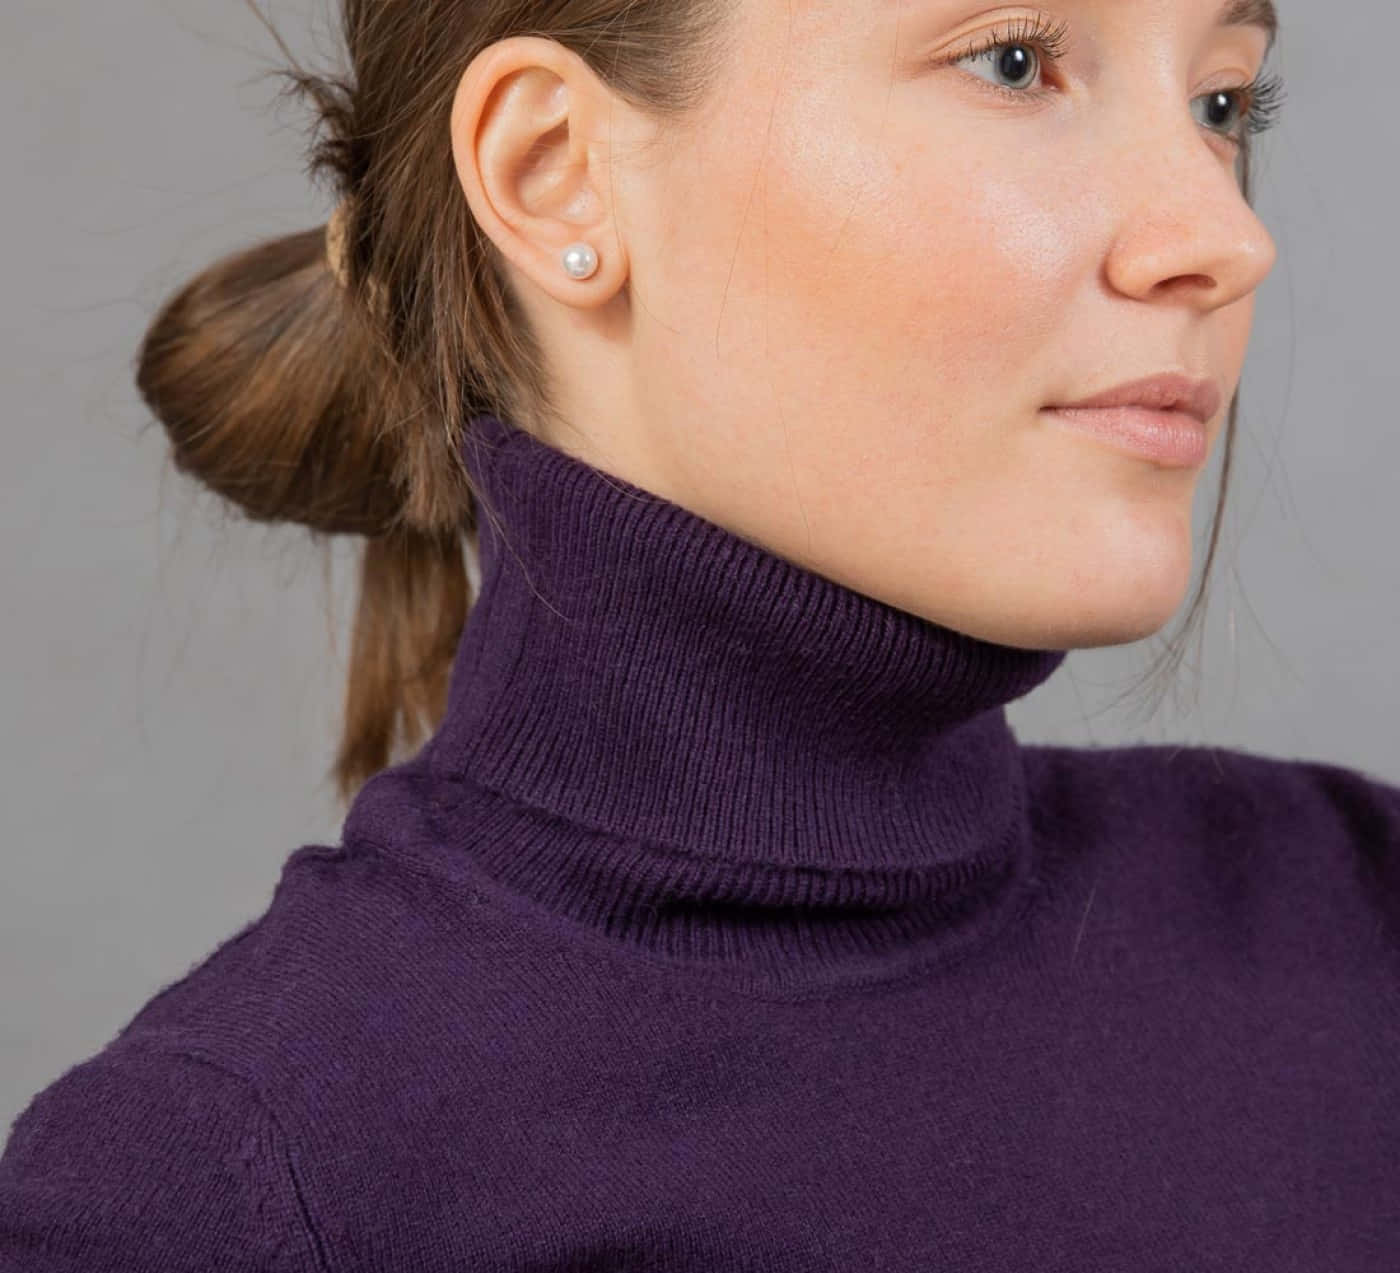 Refresh your wardrobe for fall with this stylish purple turtle neck sweater. Wallpaper